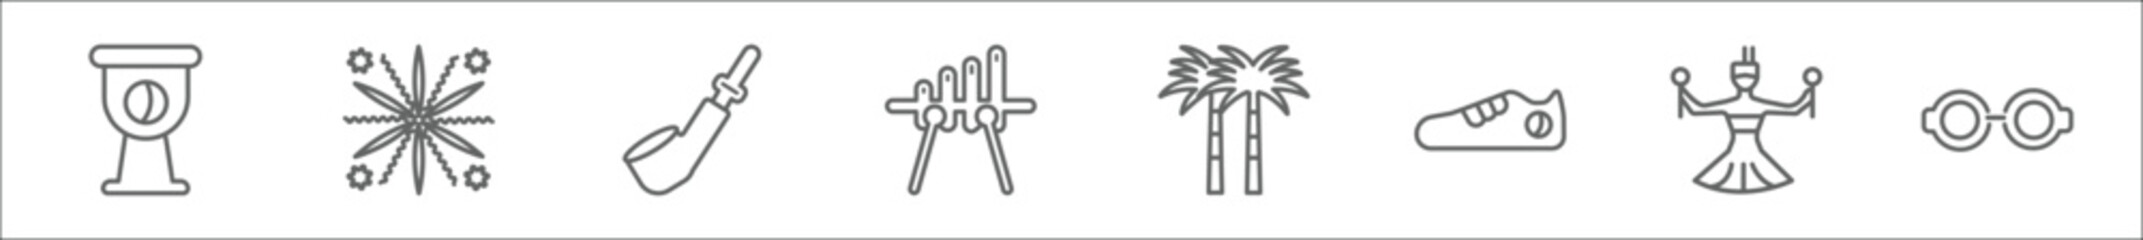 outline set of brazilia line icons. linear vector icons such as drum, fireworks, horn, xylophone, palm tree, shoes, dancer, sun glasses